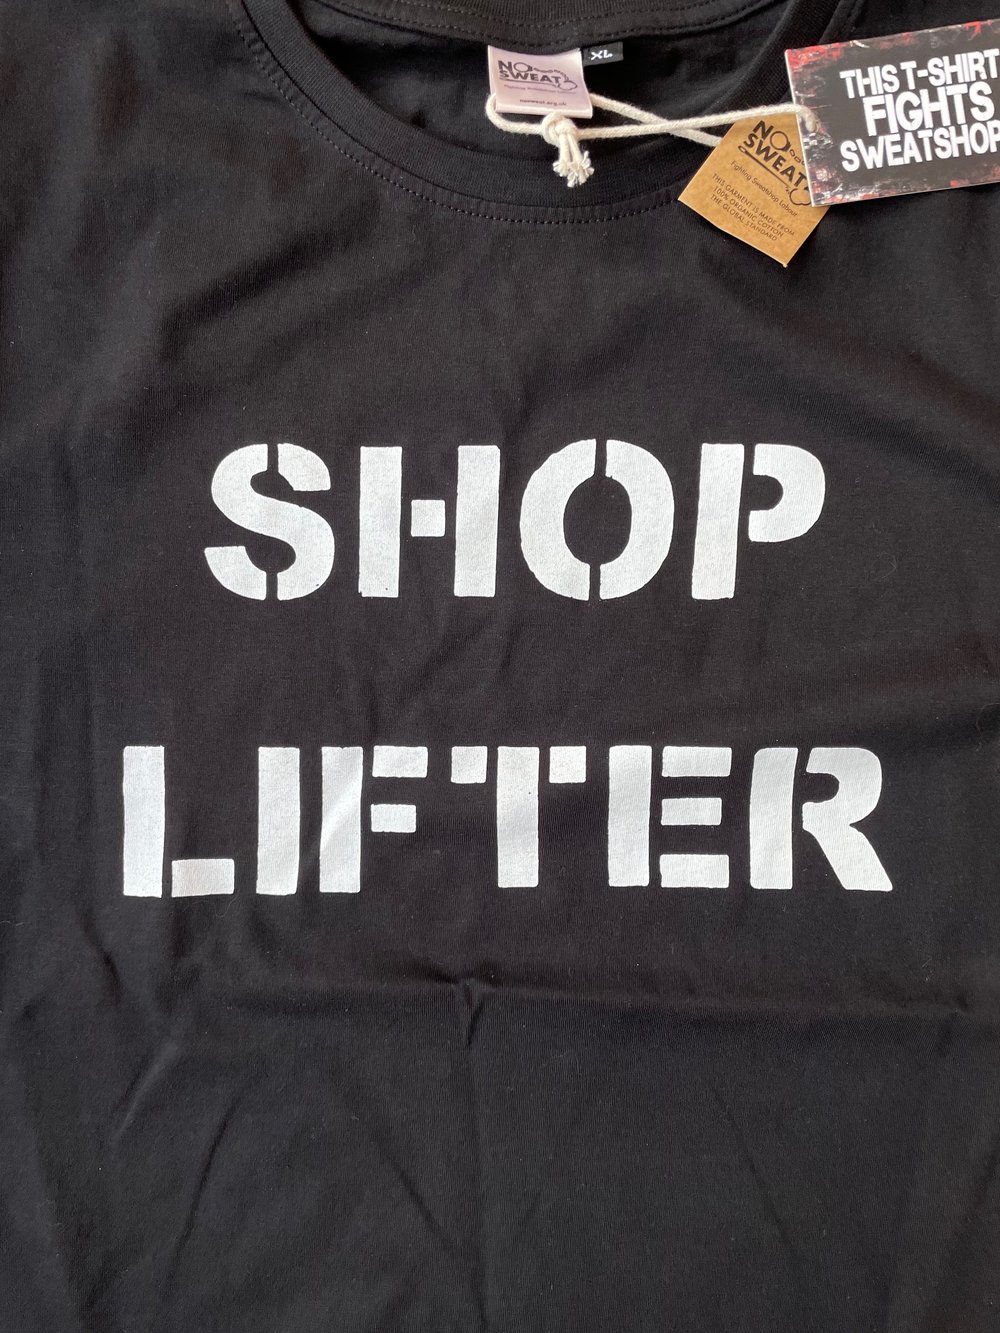 Image of SHOP LIFTER LADIES T-SHIRT (enter choice of free print in notes)